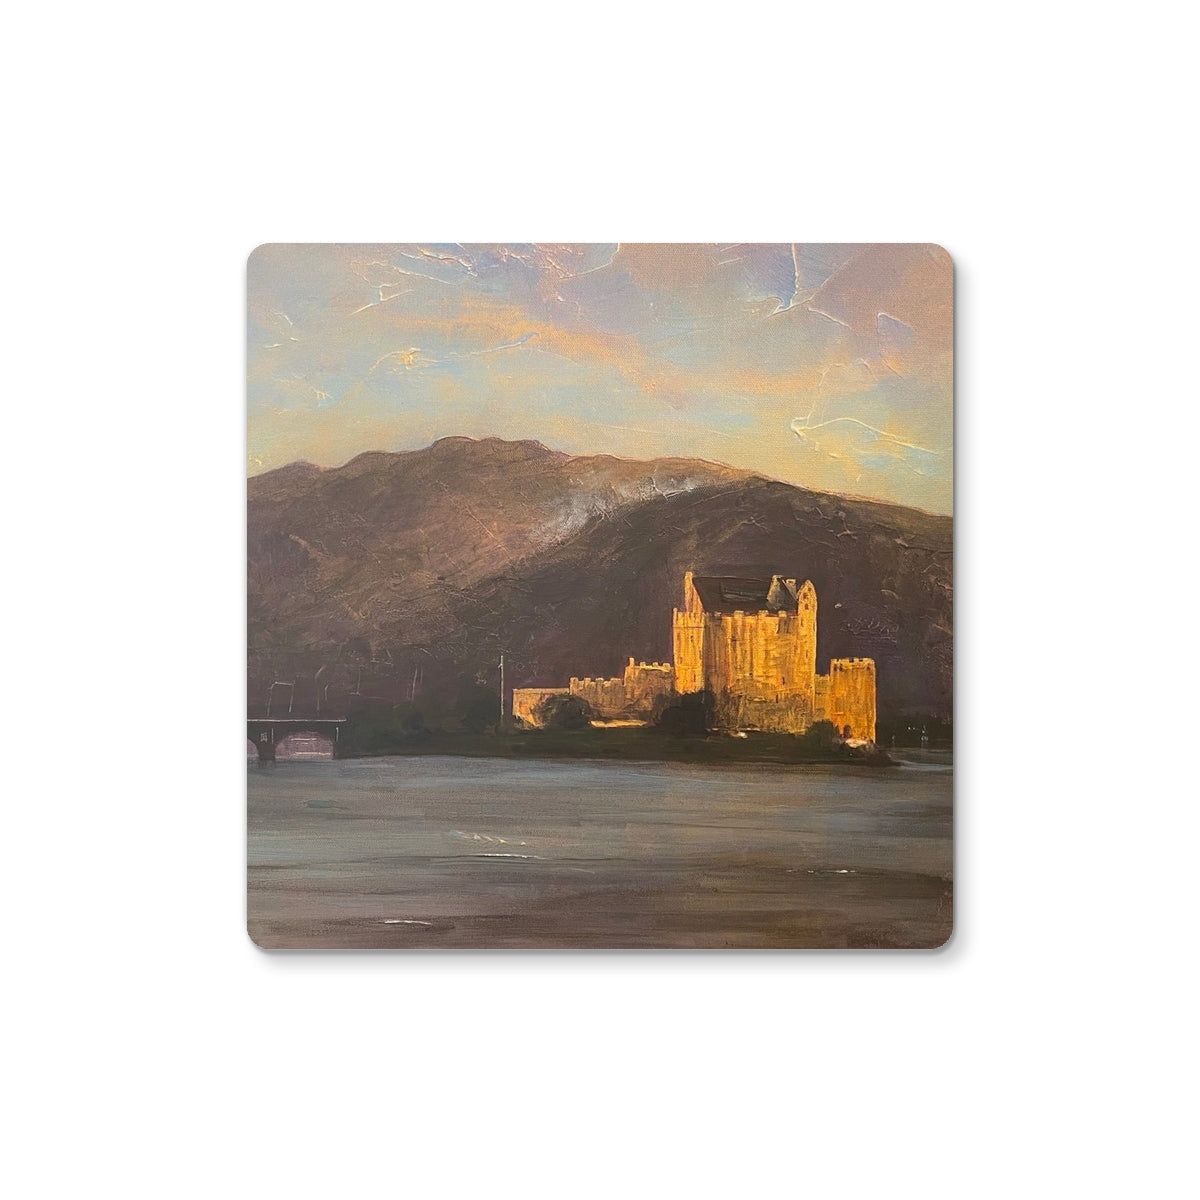 Eilean Donan Castle Art Gifts Coaster-Coasters-Historic & Iconic Scotland Art Gallery-2 Coasters-Paintings, Prints, Homeware, Art Gifts From Scotland By Scottish Artist Kevin Hunter